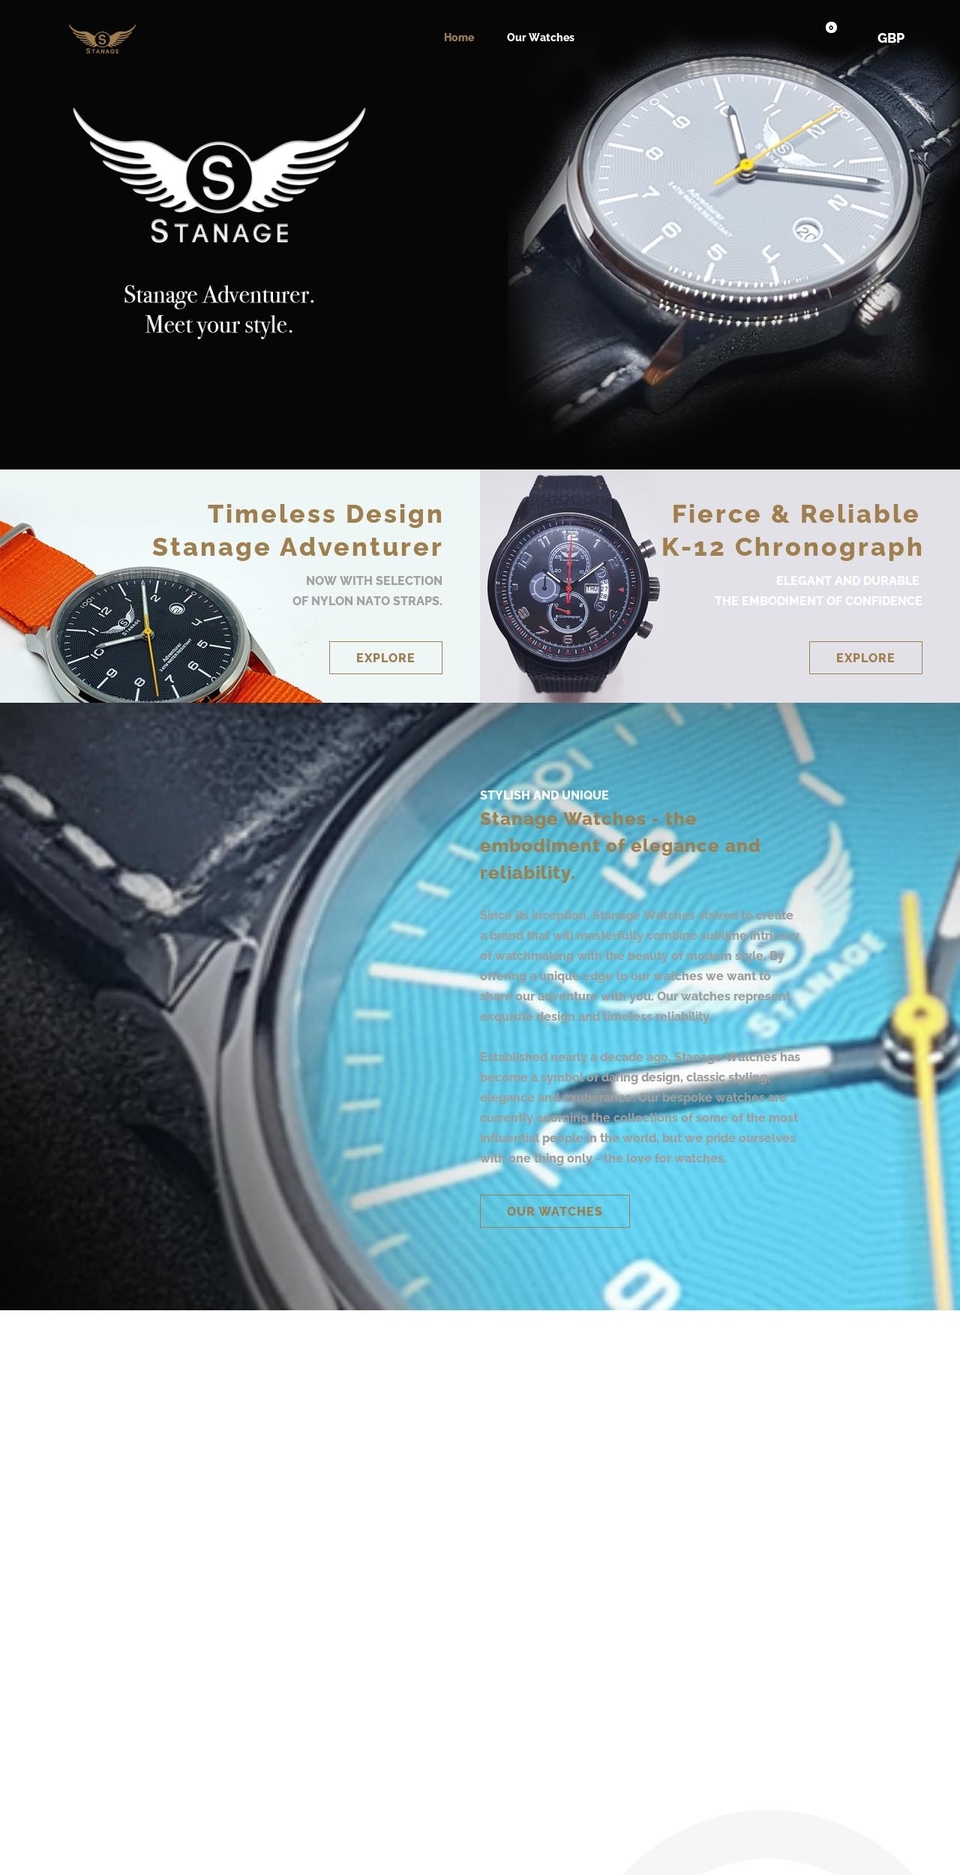 install Shopify theme site example stanagewatches.com